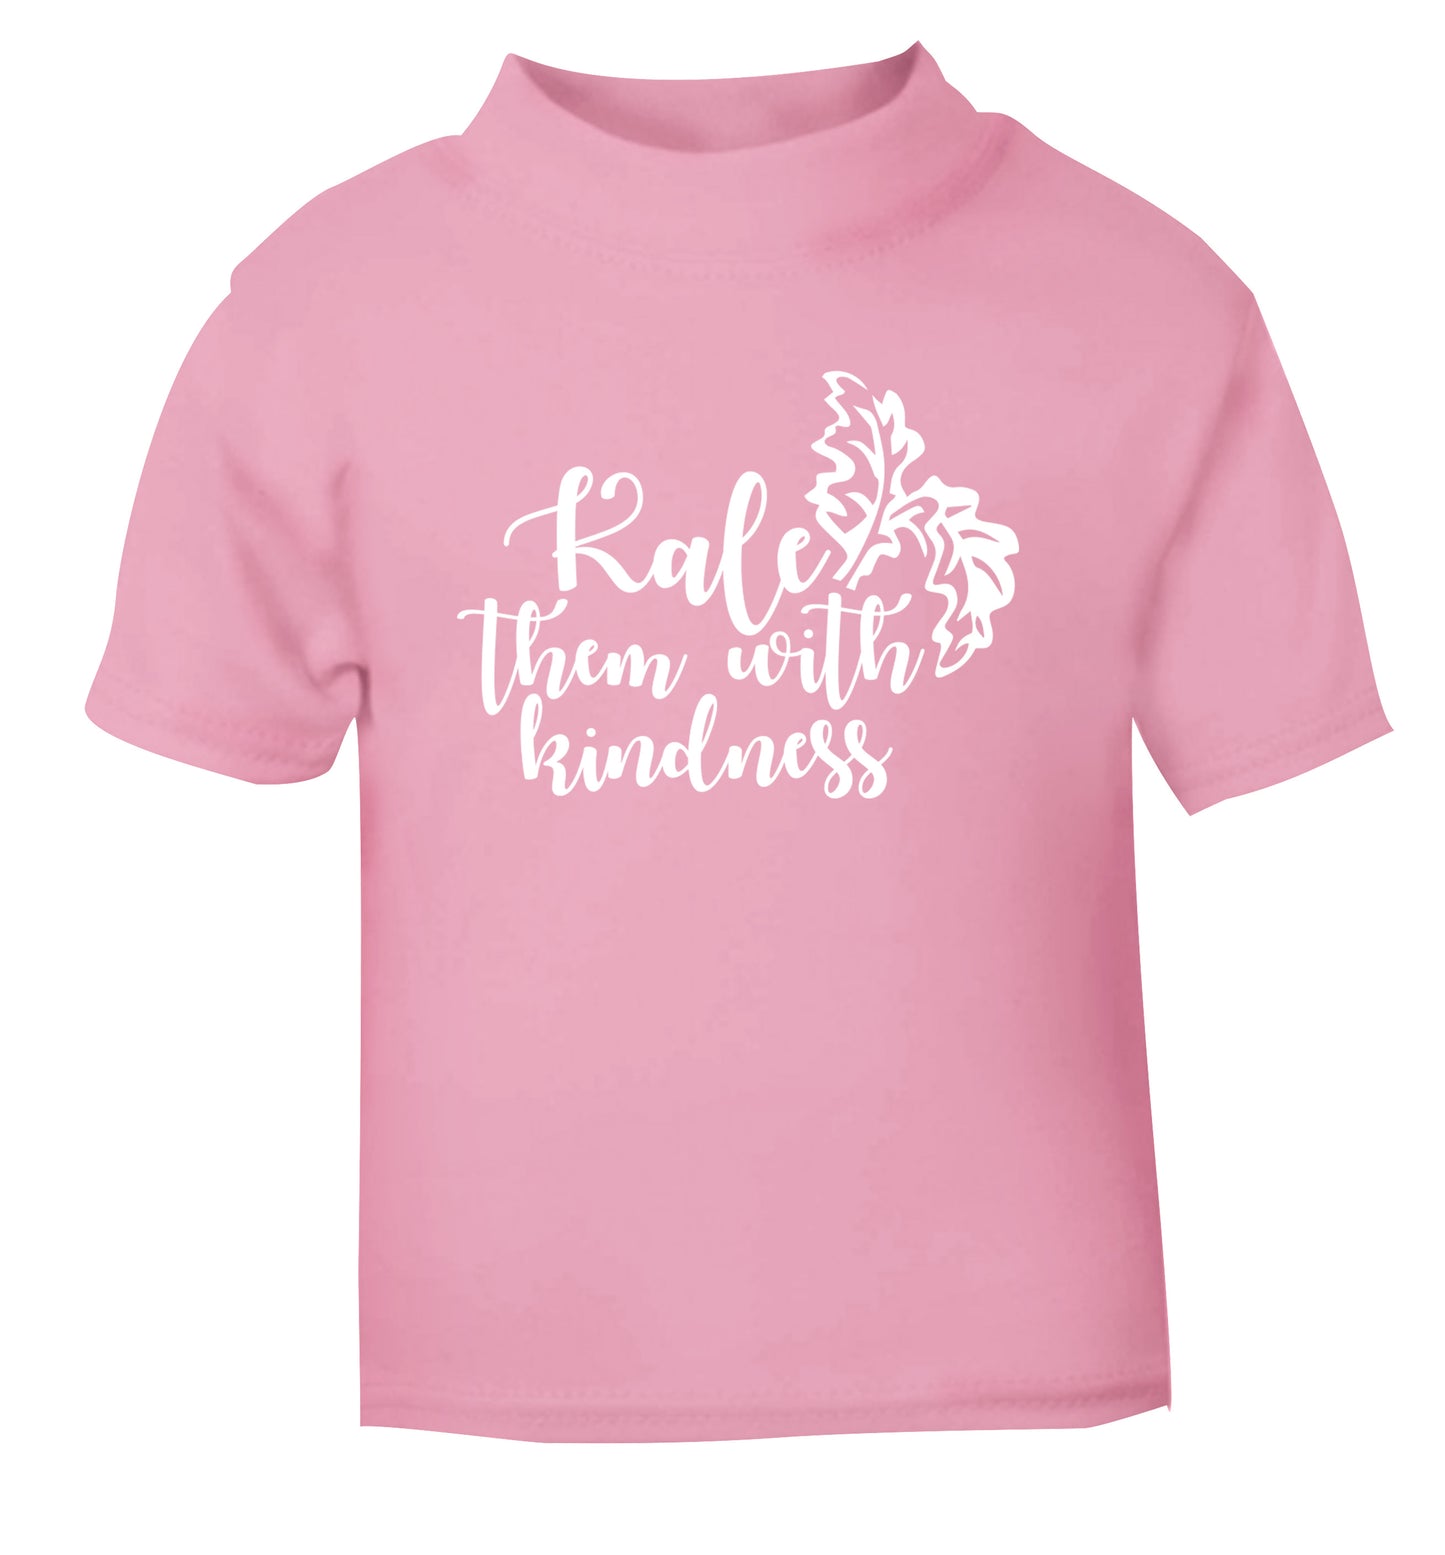 Kale them with kindness light pink Baby Toddler Tshirt 2 Years